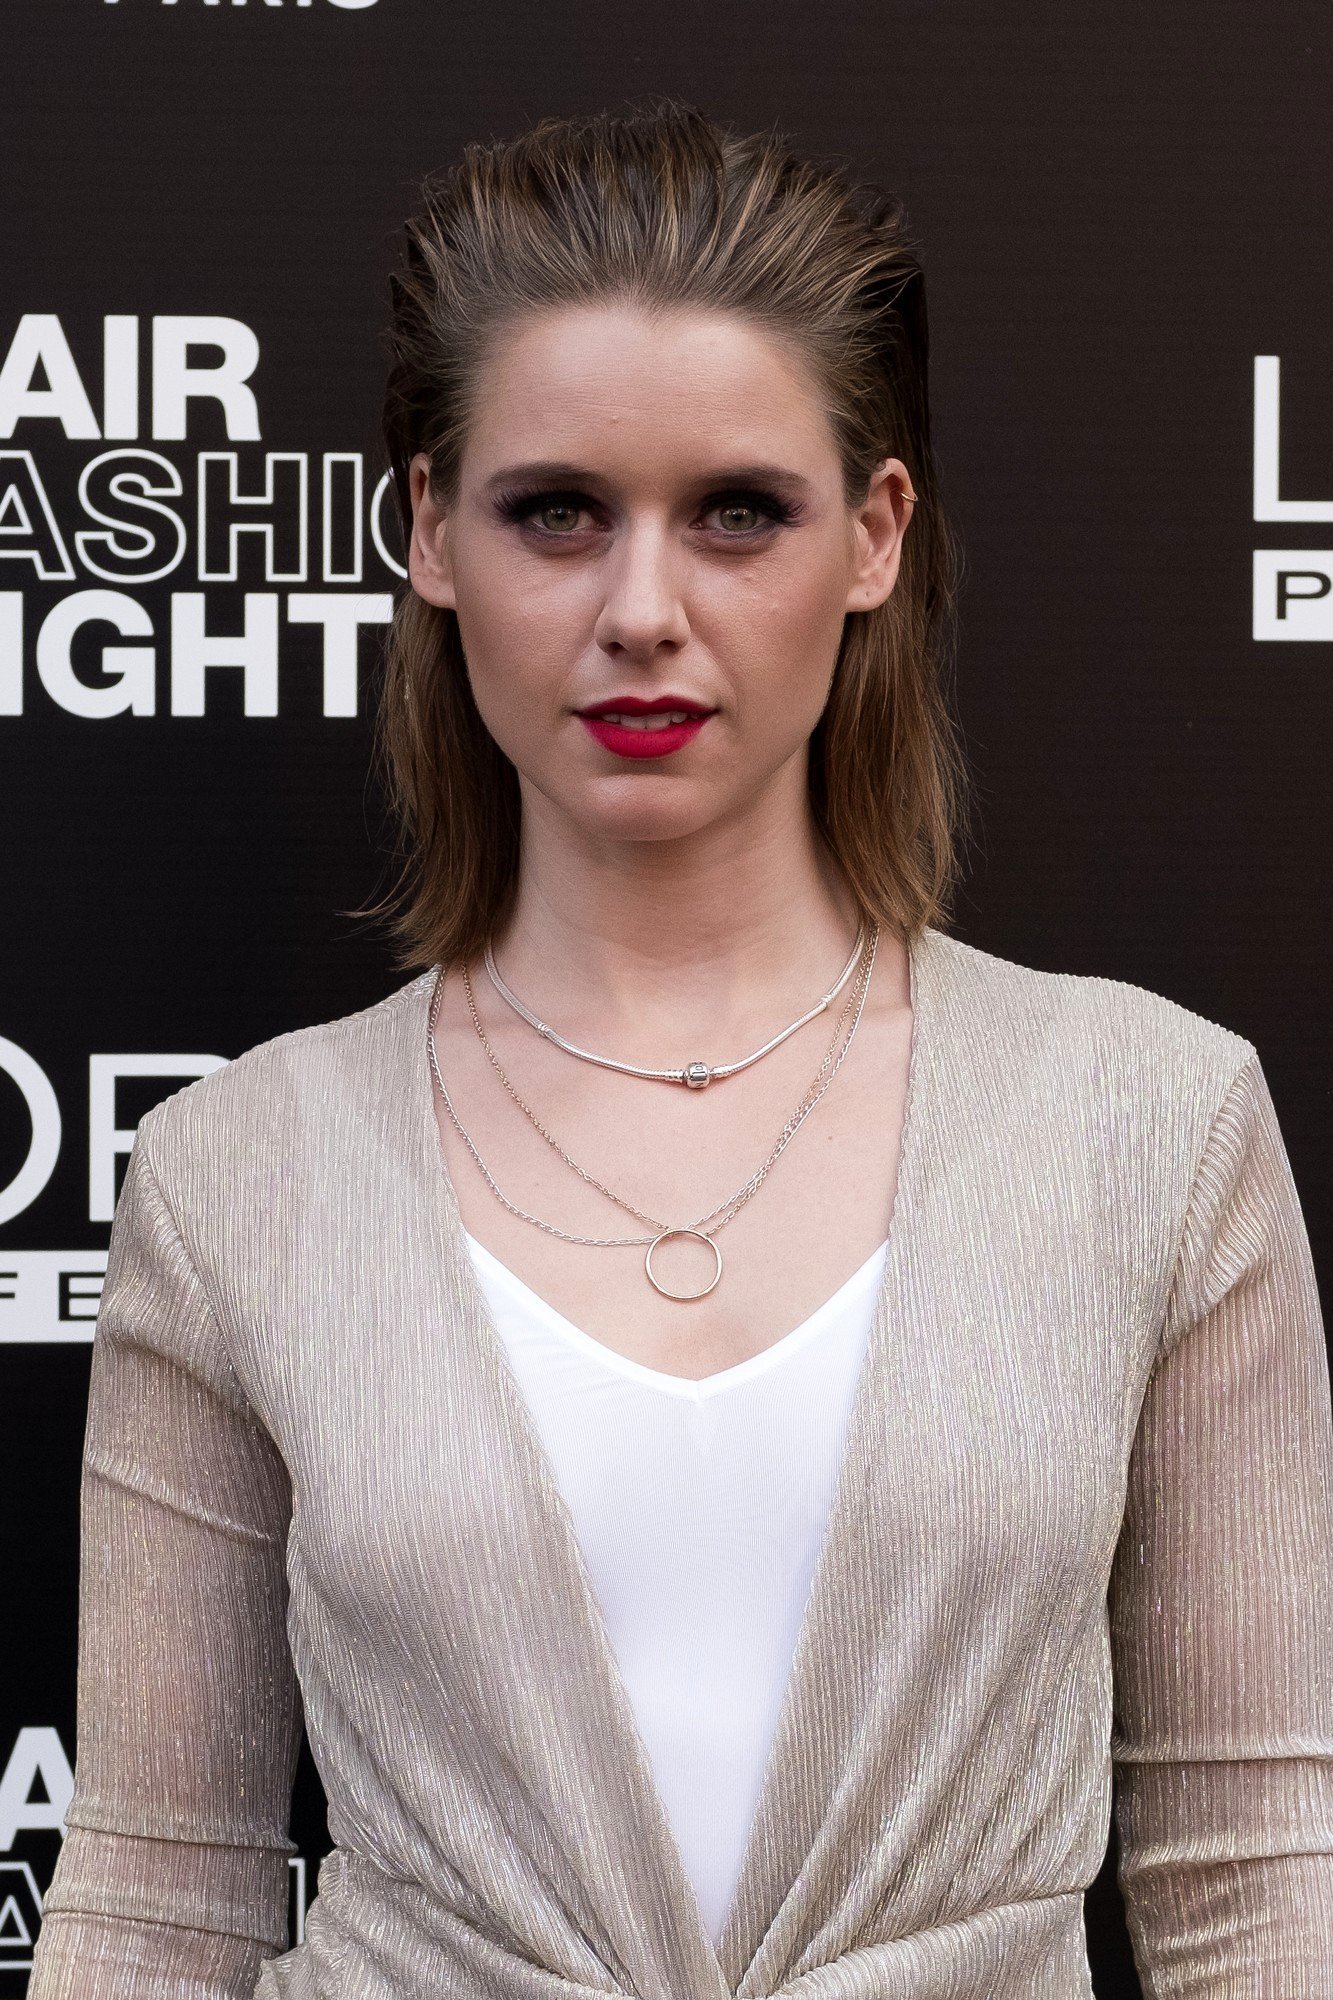 Manuela Velles - Hair Fashion Night by L'Oreal at Callao Cinema Photocall | Picture 1507428